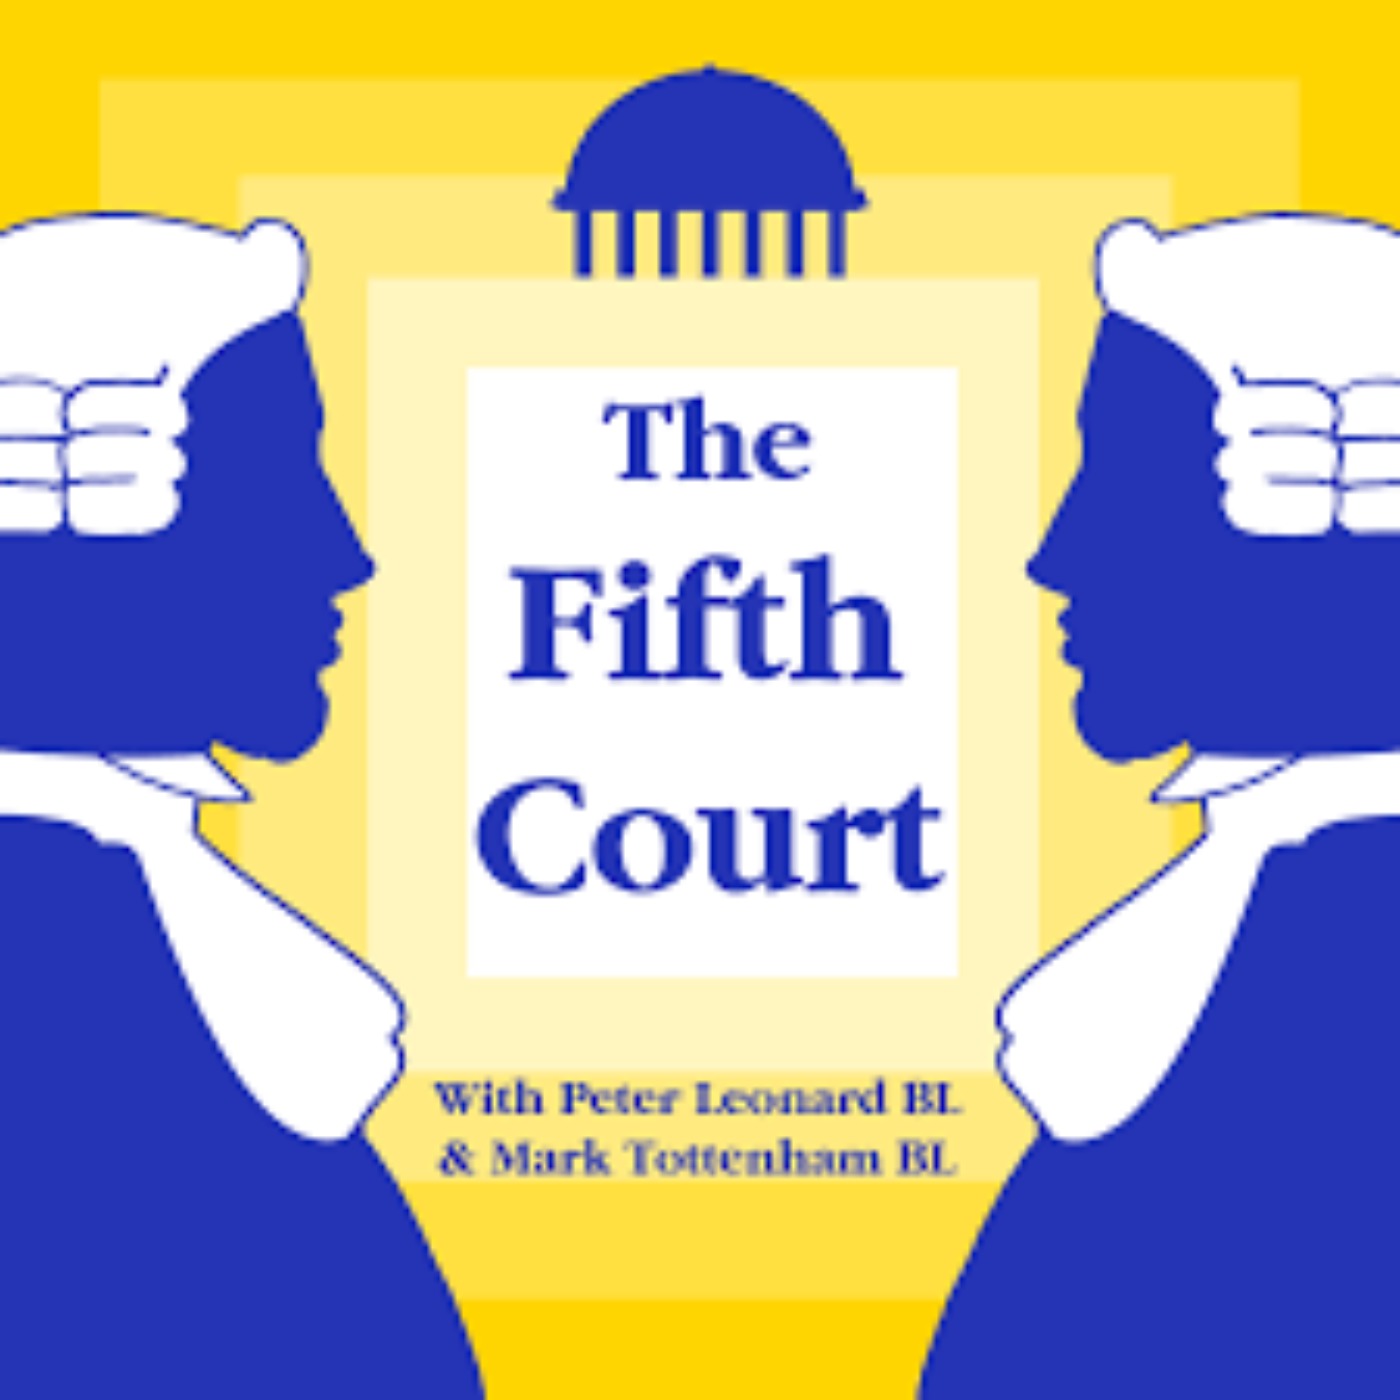 E76 The Fifth Court - Senator Barry Ward BL on the powers of local authorities and elected councillors